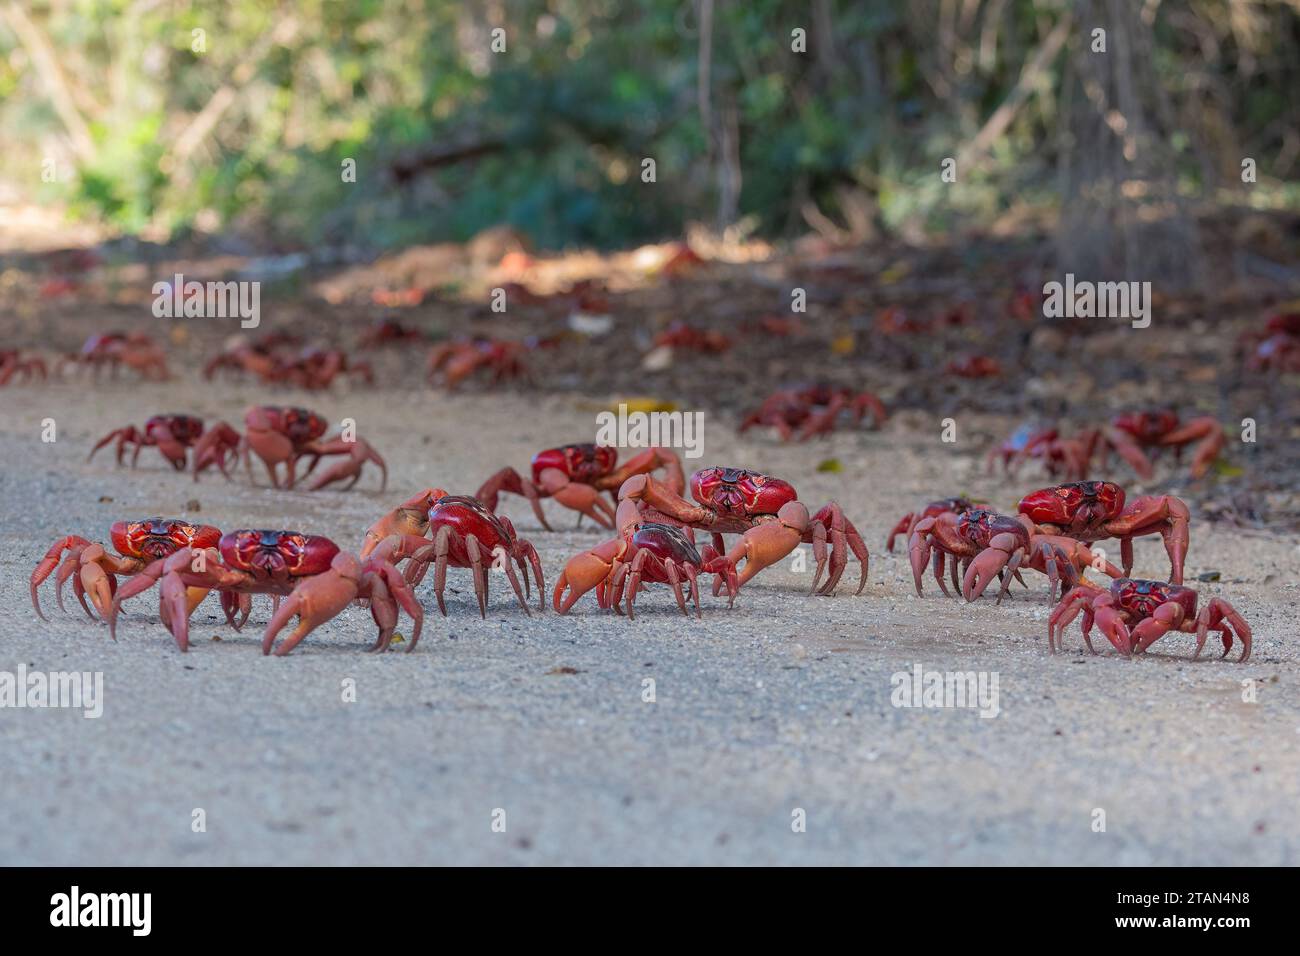 Red Crabs (Gecarcoidea natalis) on the move during their annual migration, Christmas Island, Australia Stock Photo